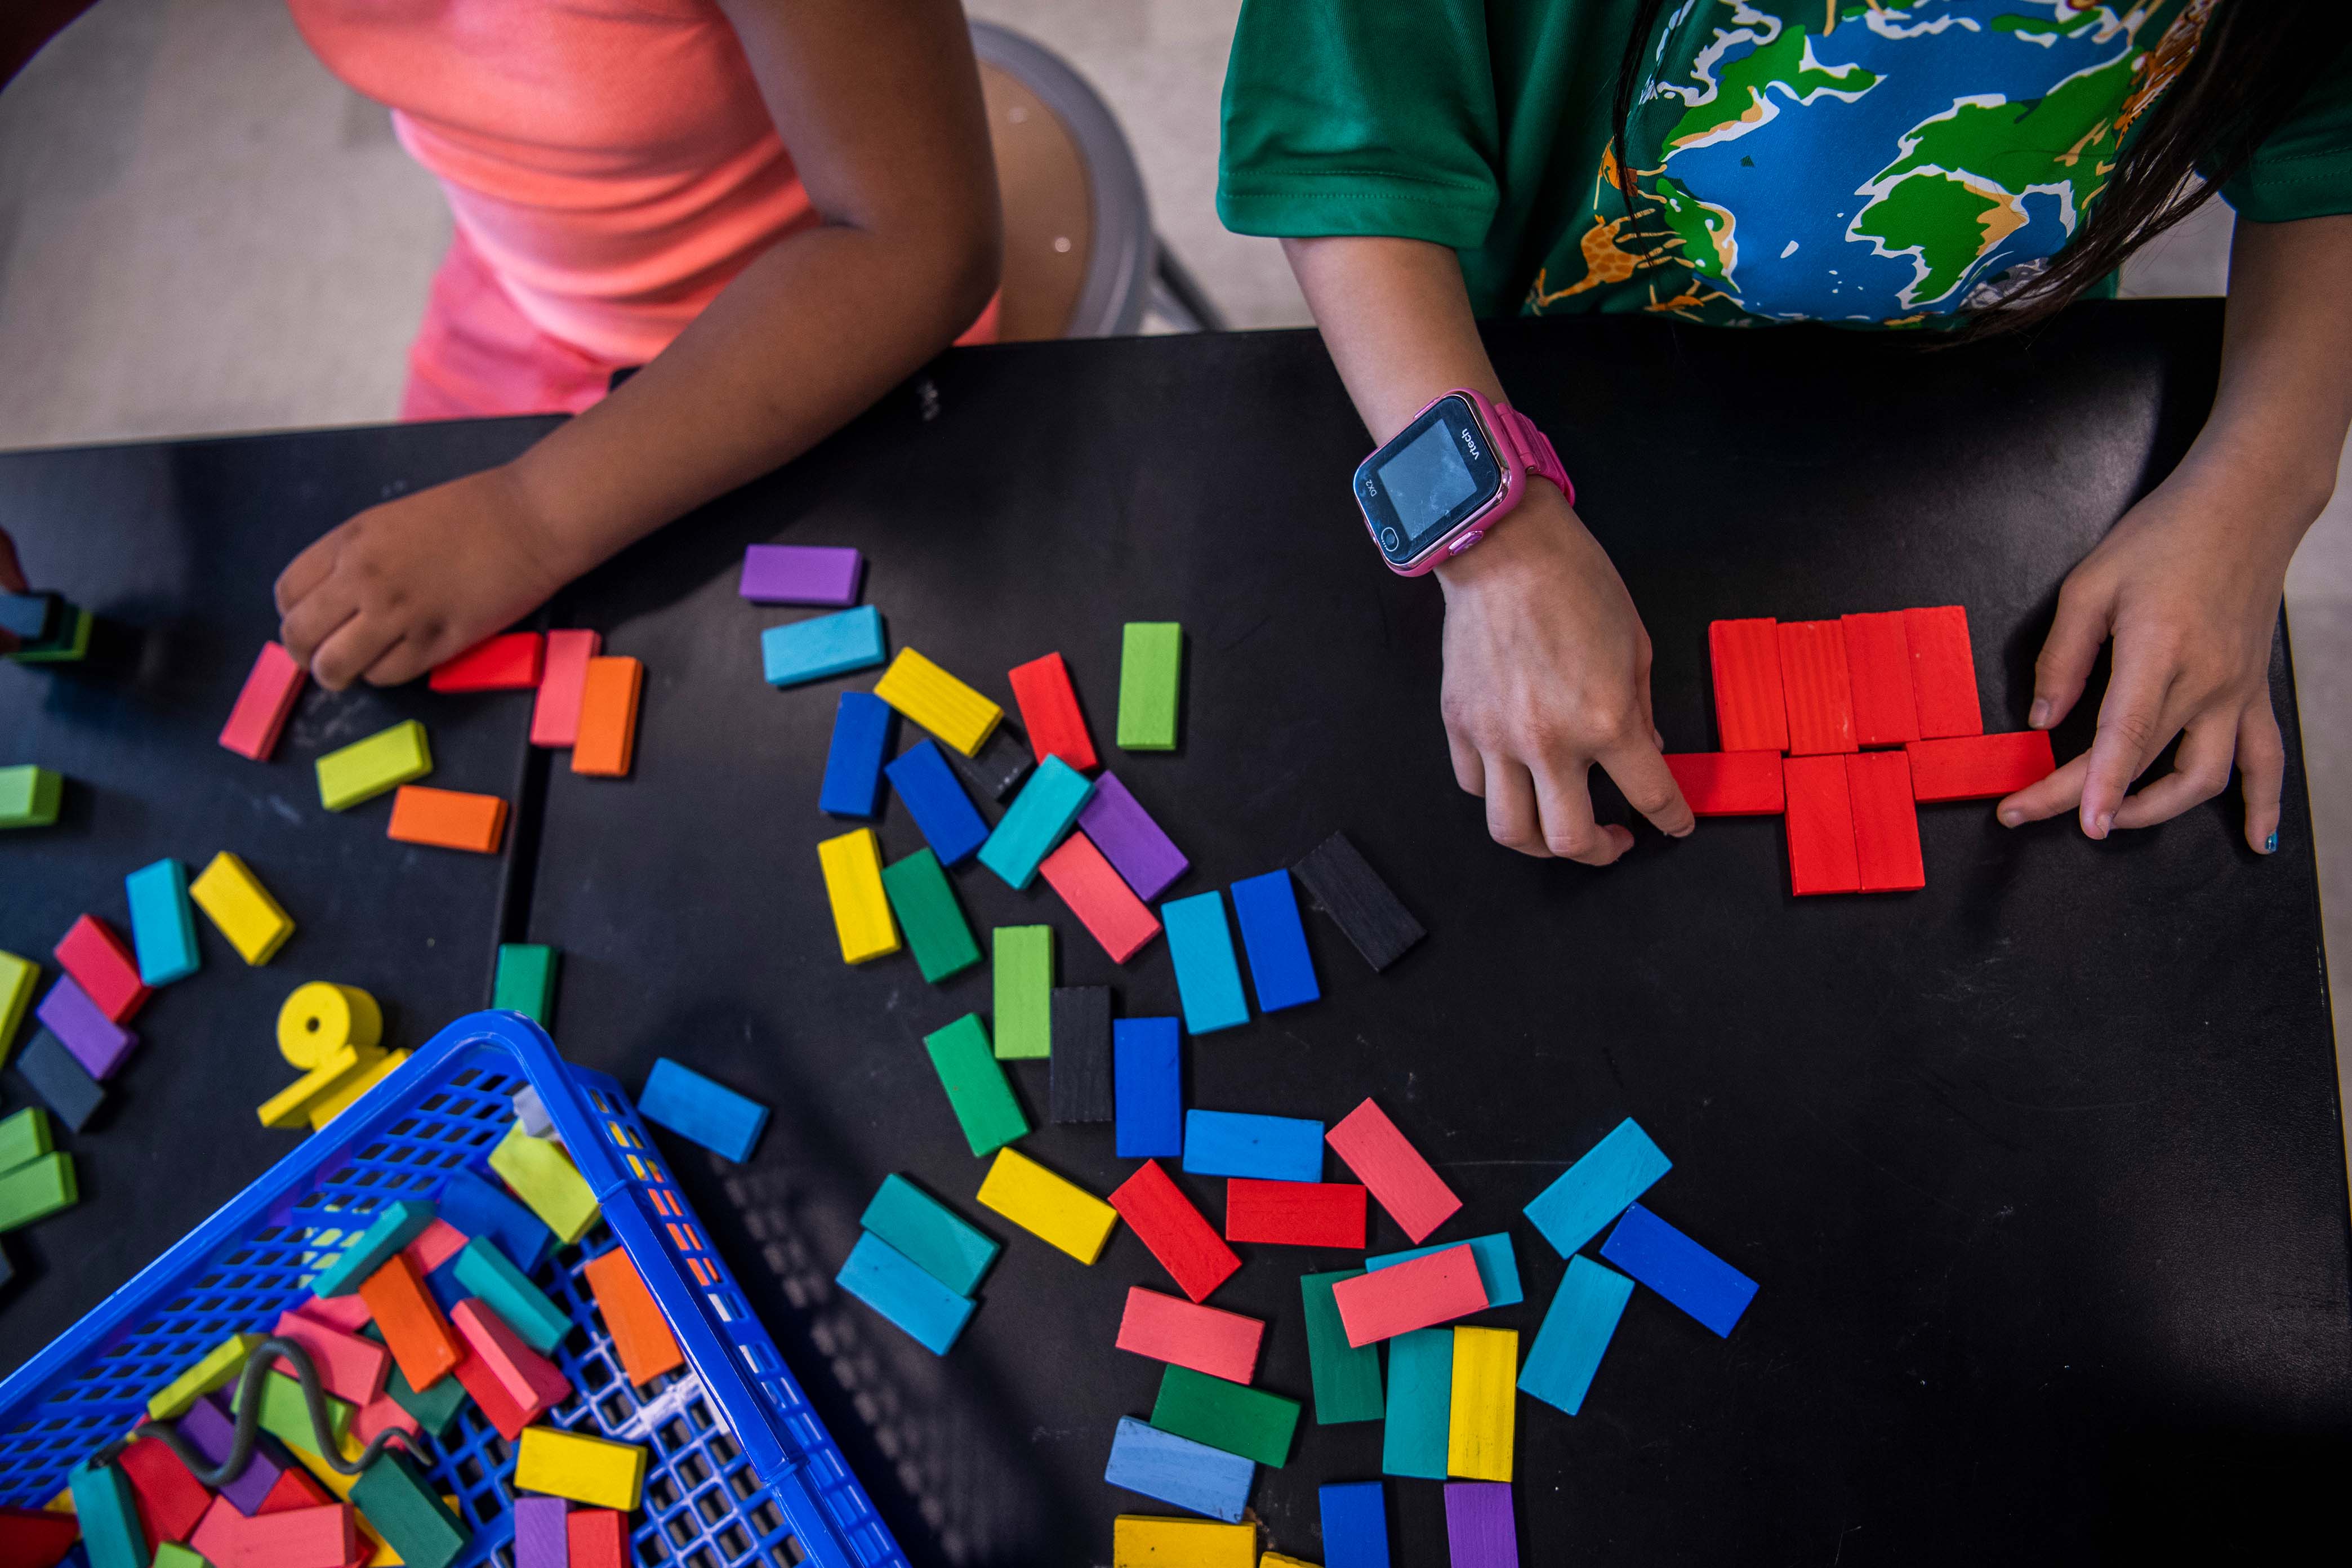 Charter Schools in NY allowing kids to play colorful blocks